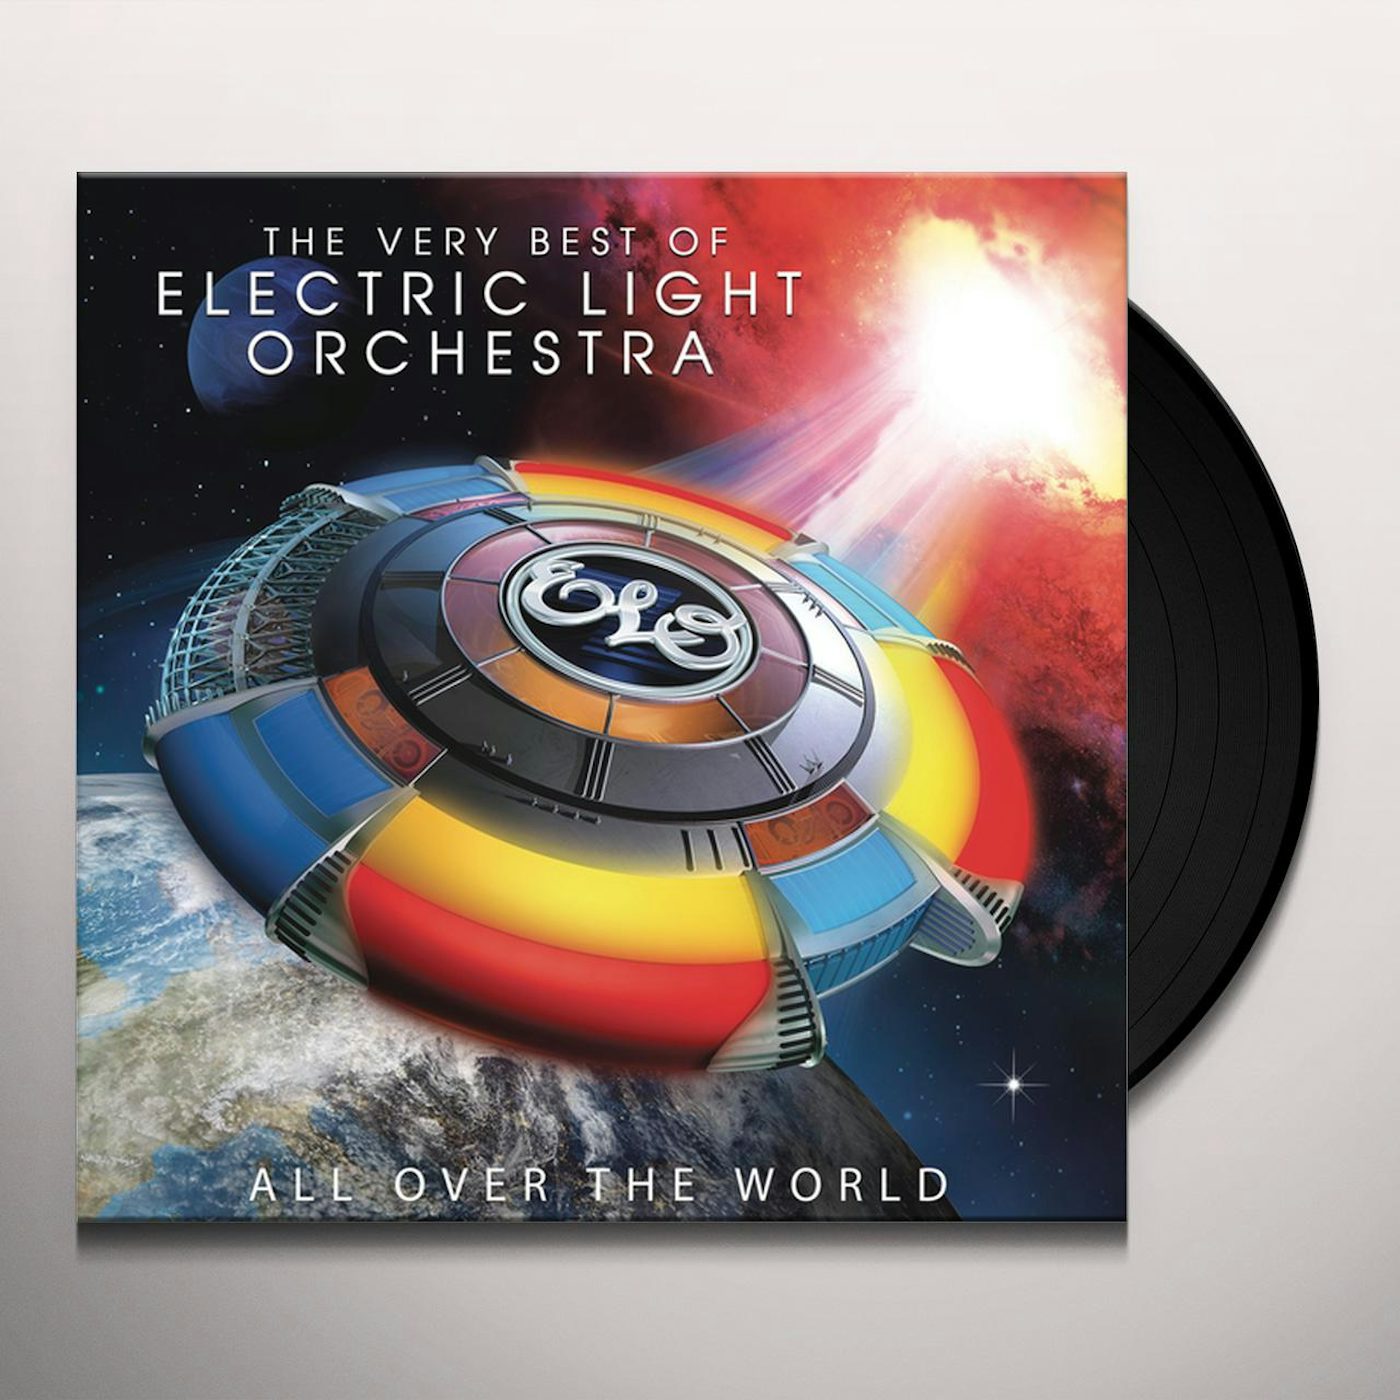 ELO (Electric Light Orchestra) ALL THE WORLD: VERY BEST ELECTRIC Vinyl Record